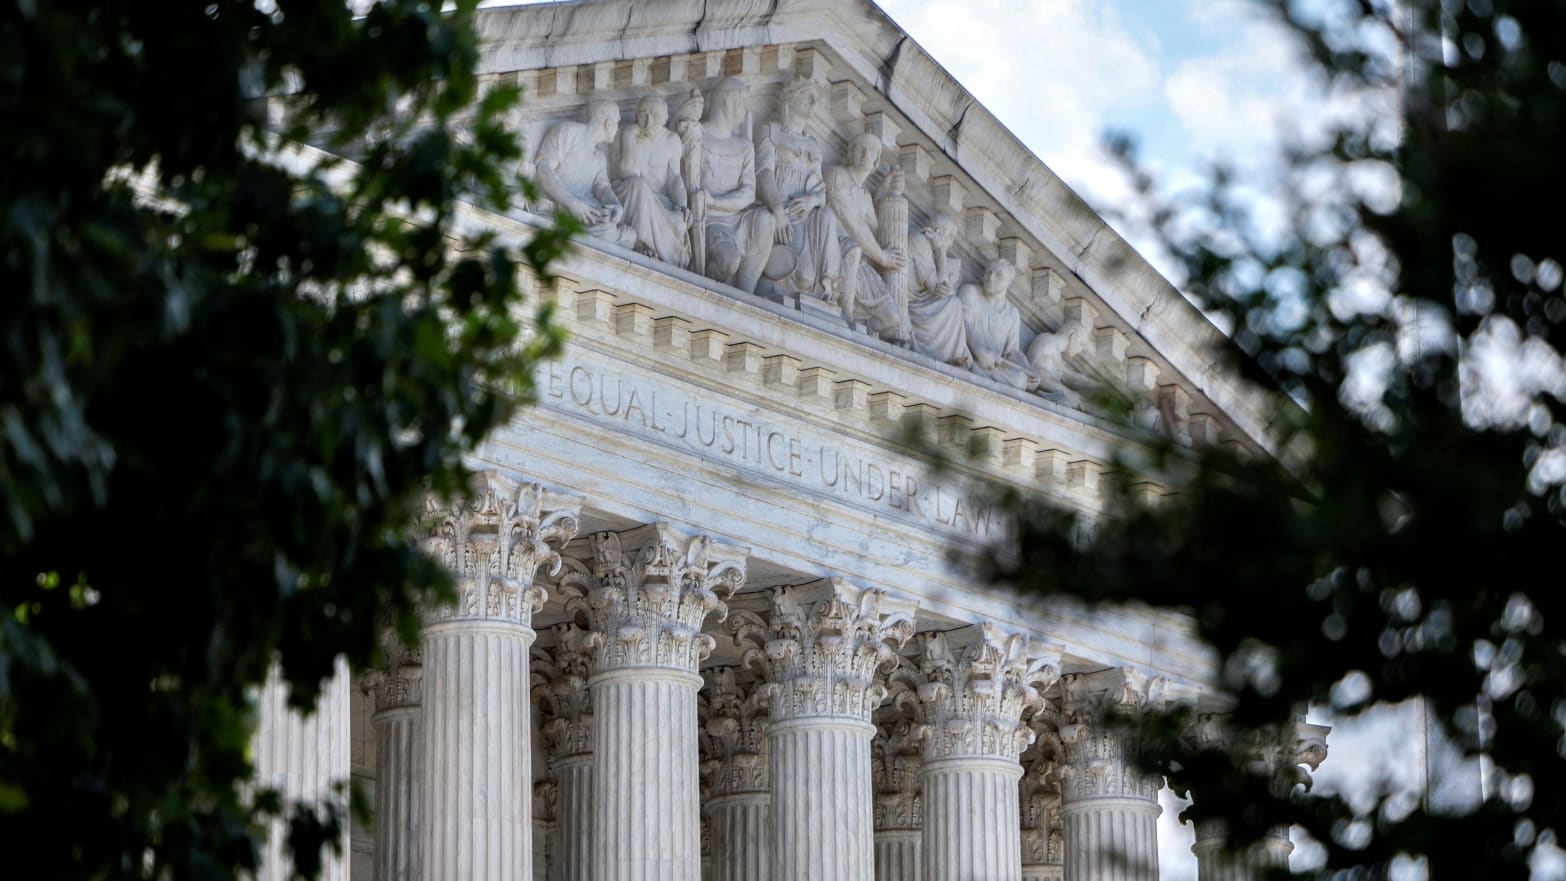 A view of the U.S. Supreme Court building.